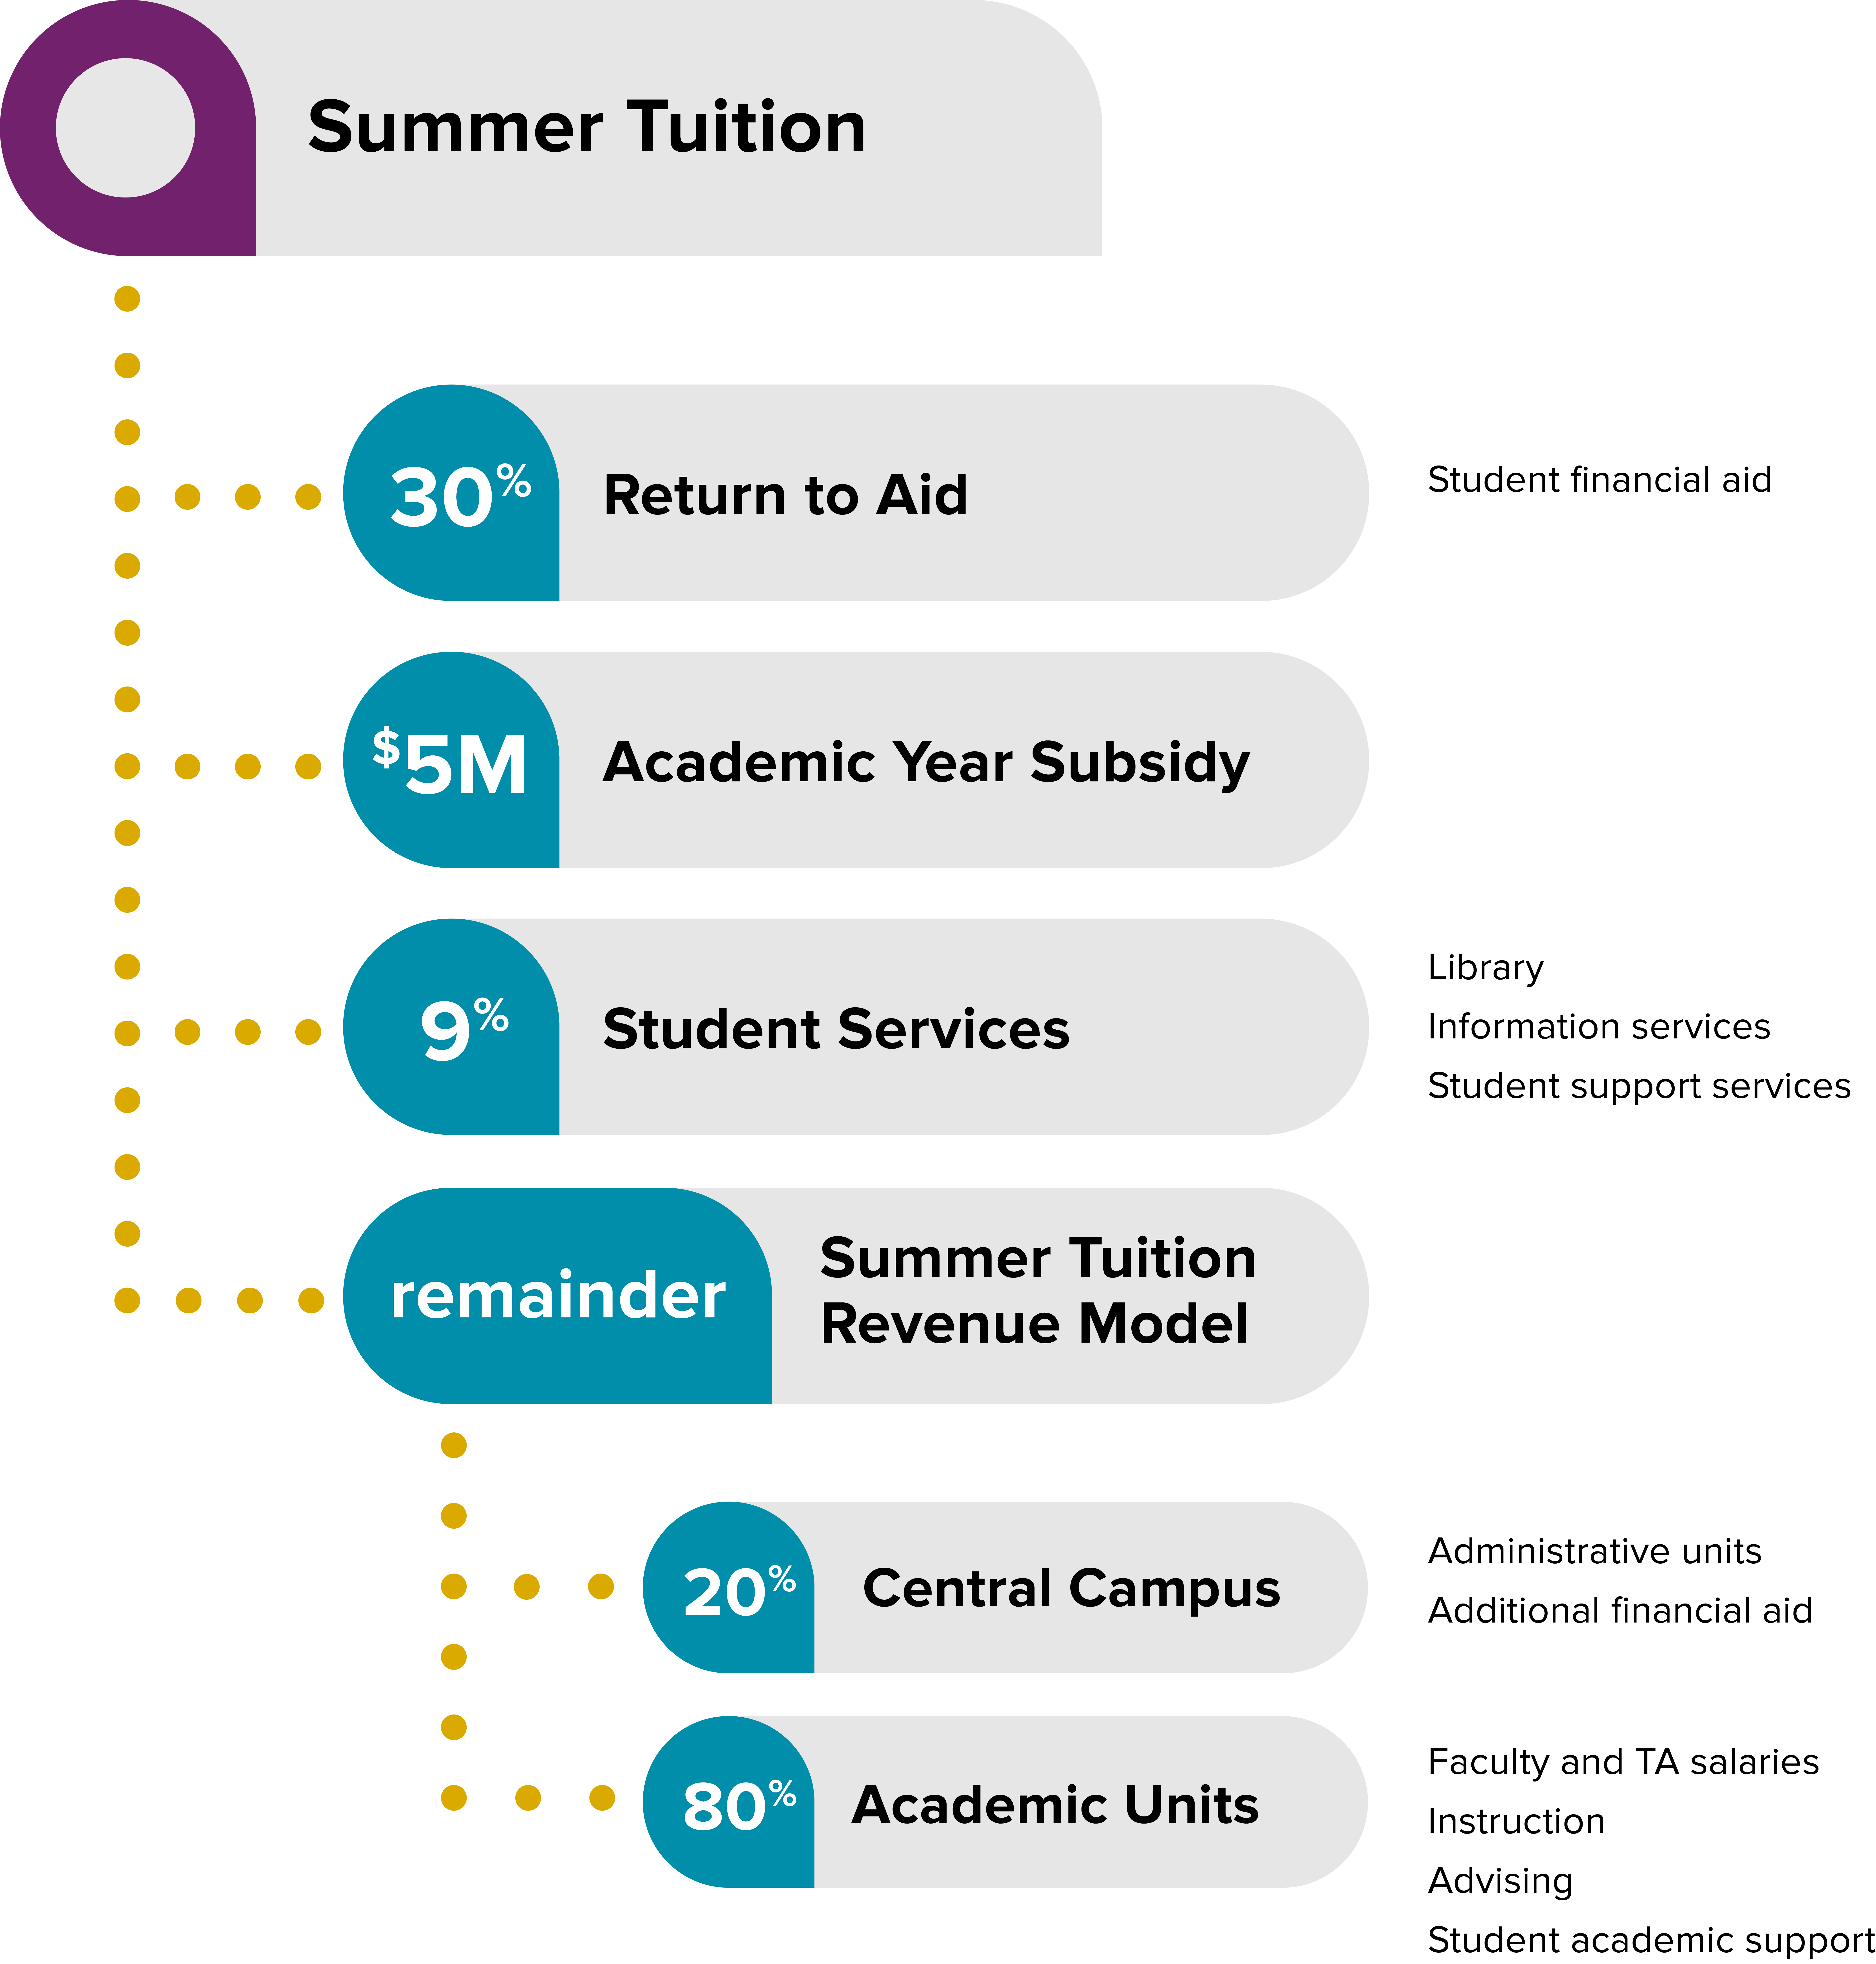 Diagram for incentive-based budget model for summer tuition, as described on the webpage